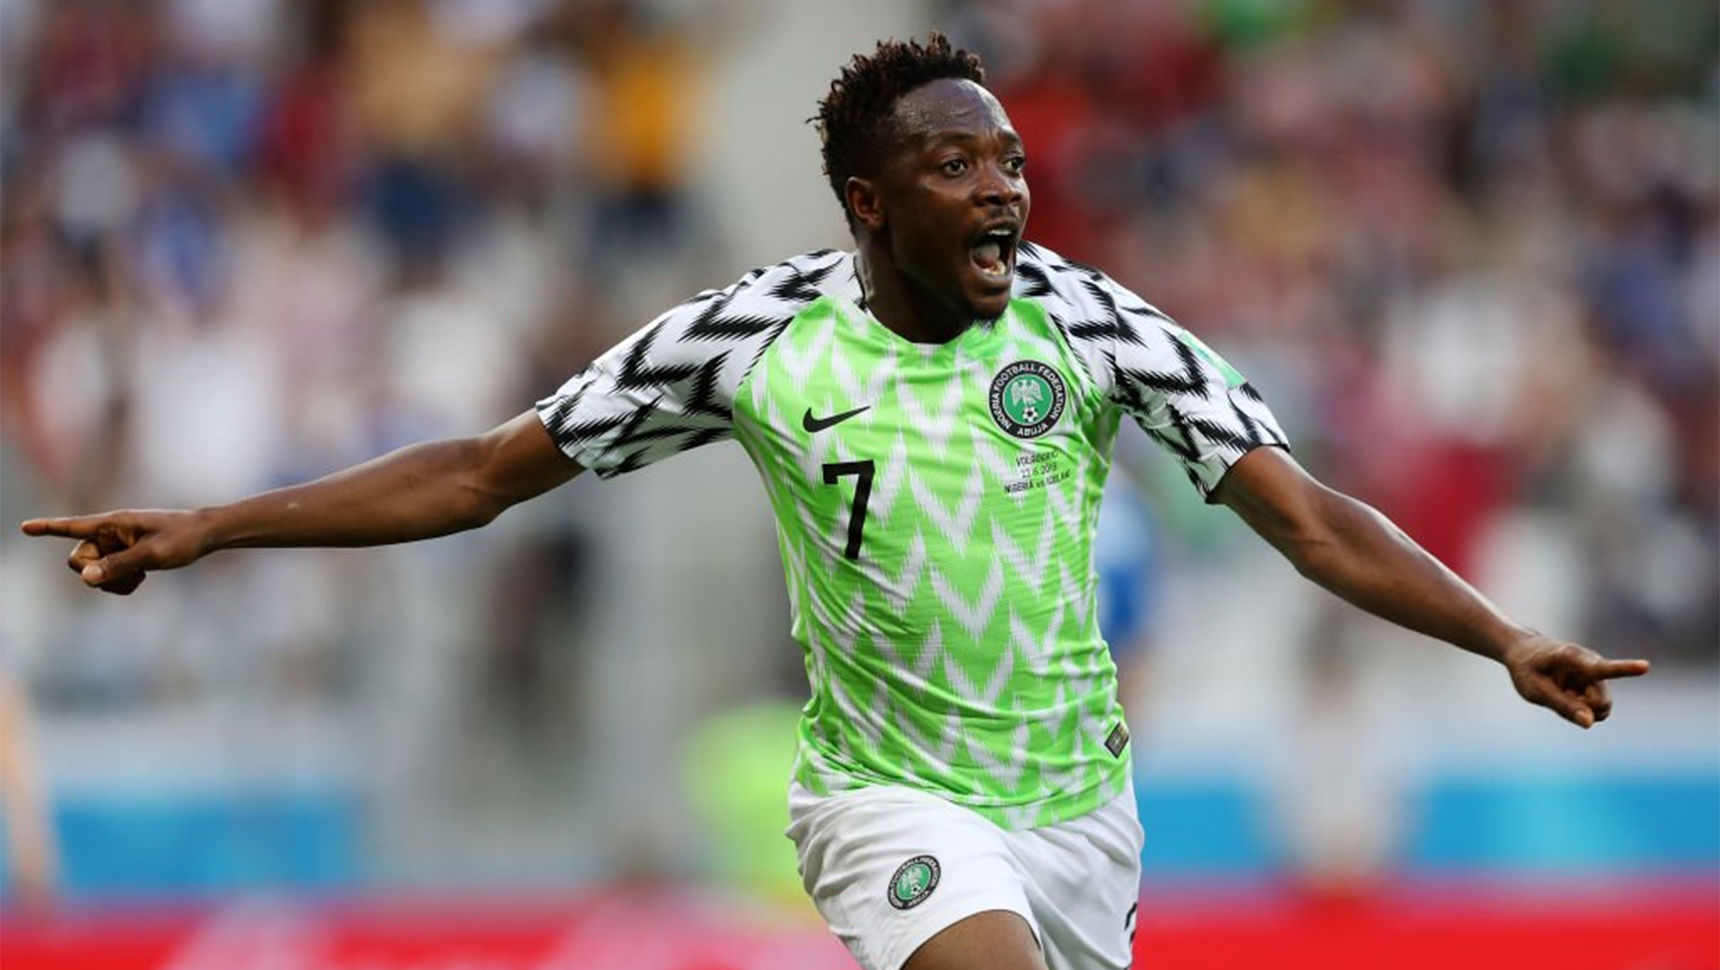 Ahmed Musa completed a transfer from Leicester City to Saudi Arabia club.